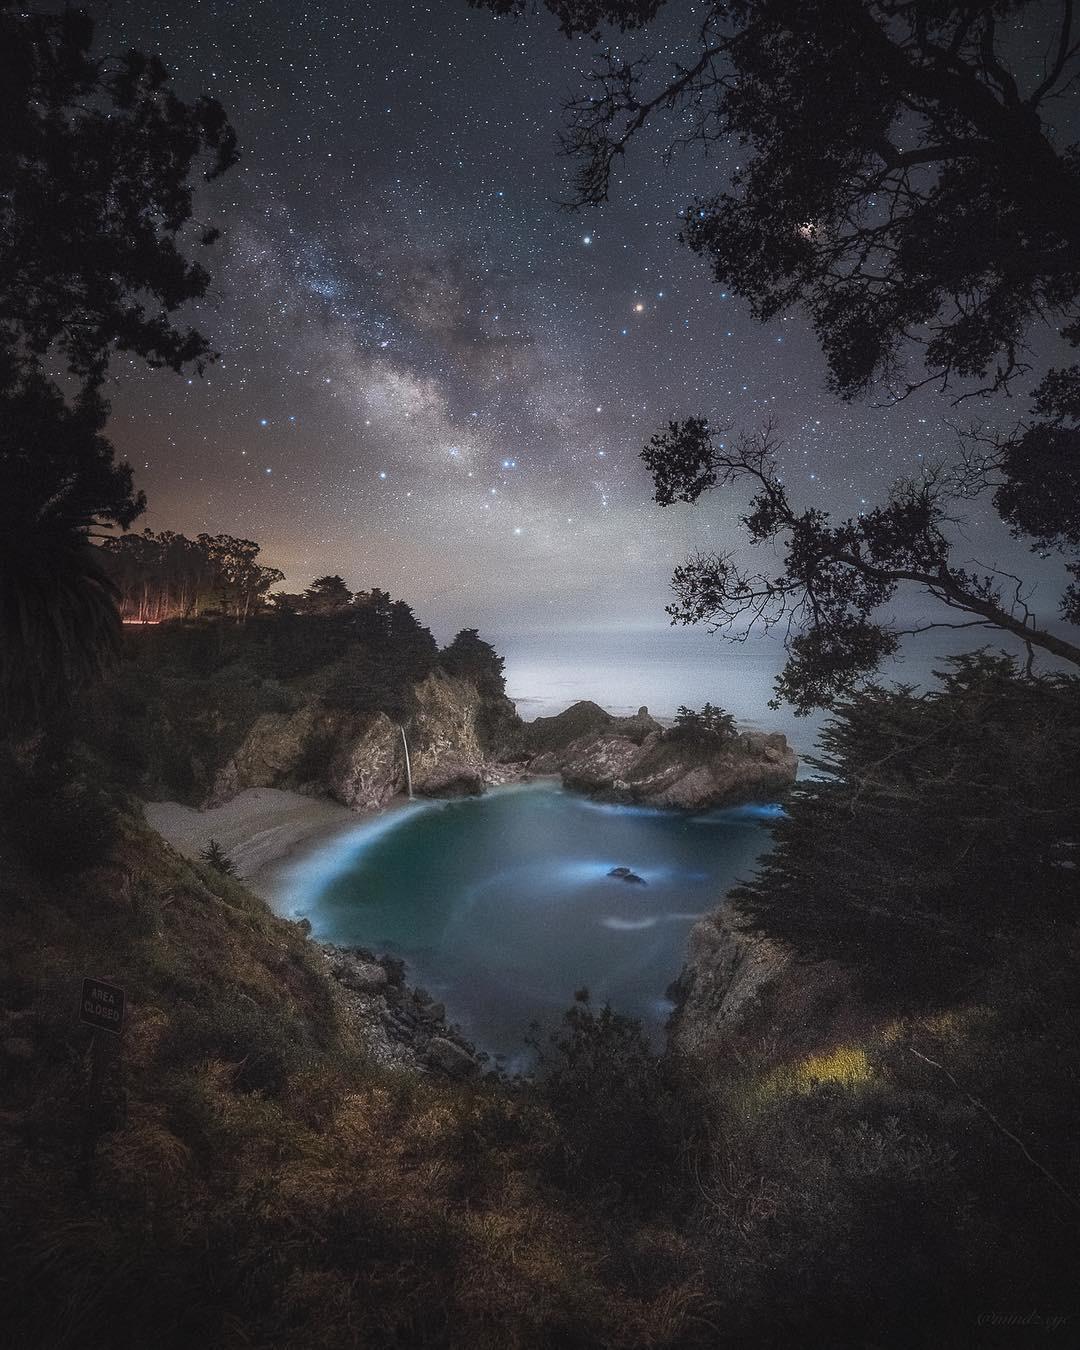 The Milky Way over McWay Falls in Big Sur, California 1080x1350